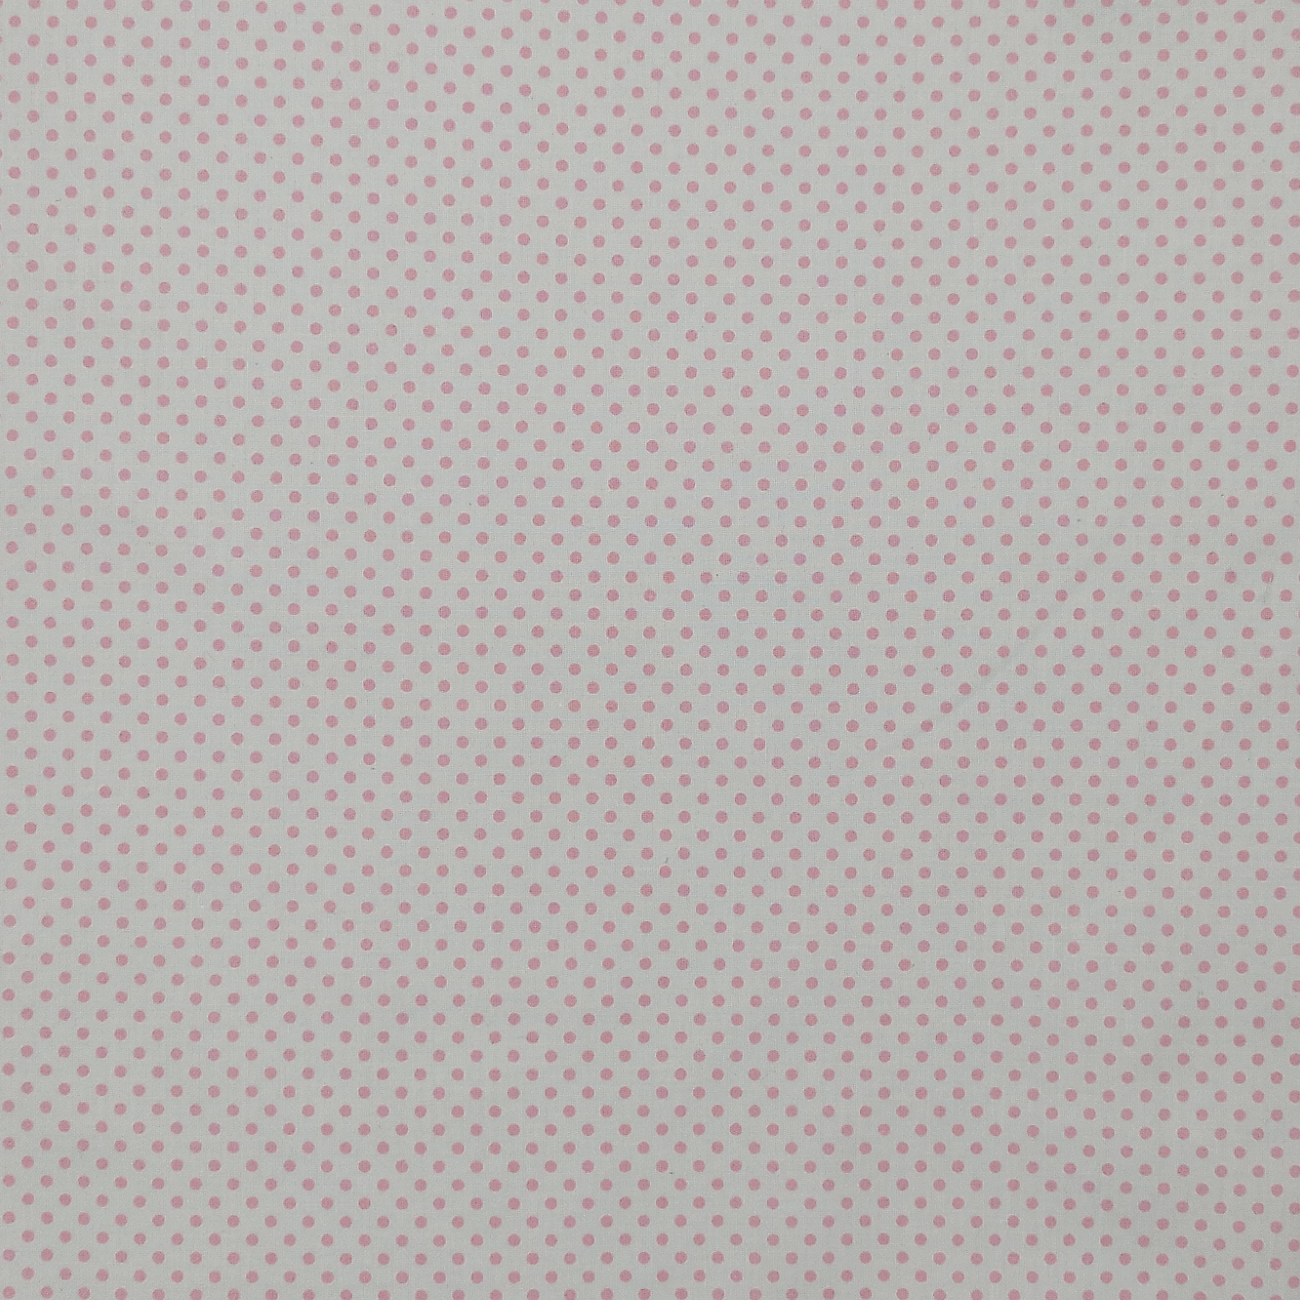 PINK DOTS - Cotton woven fabric